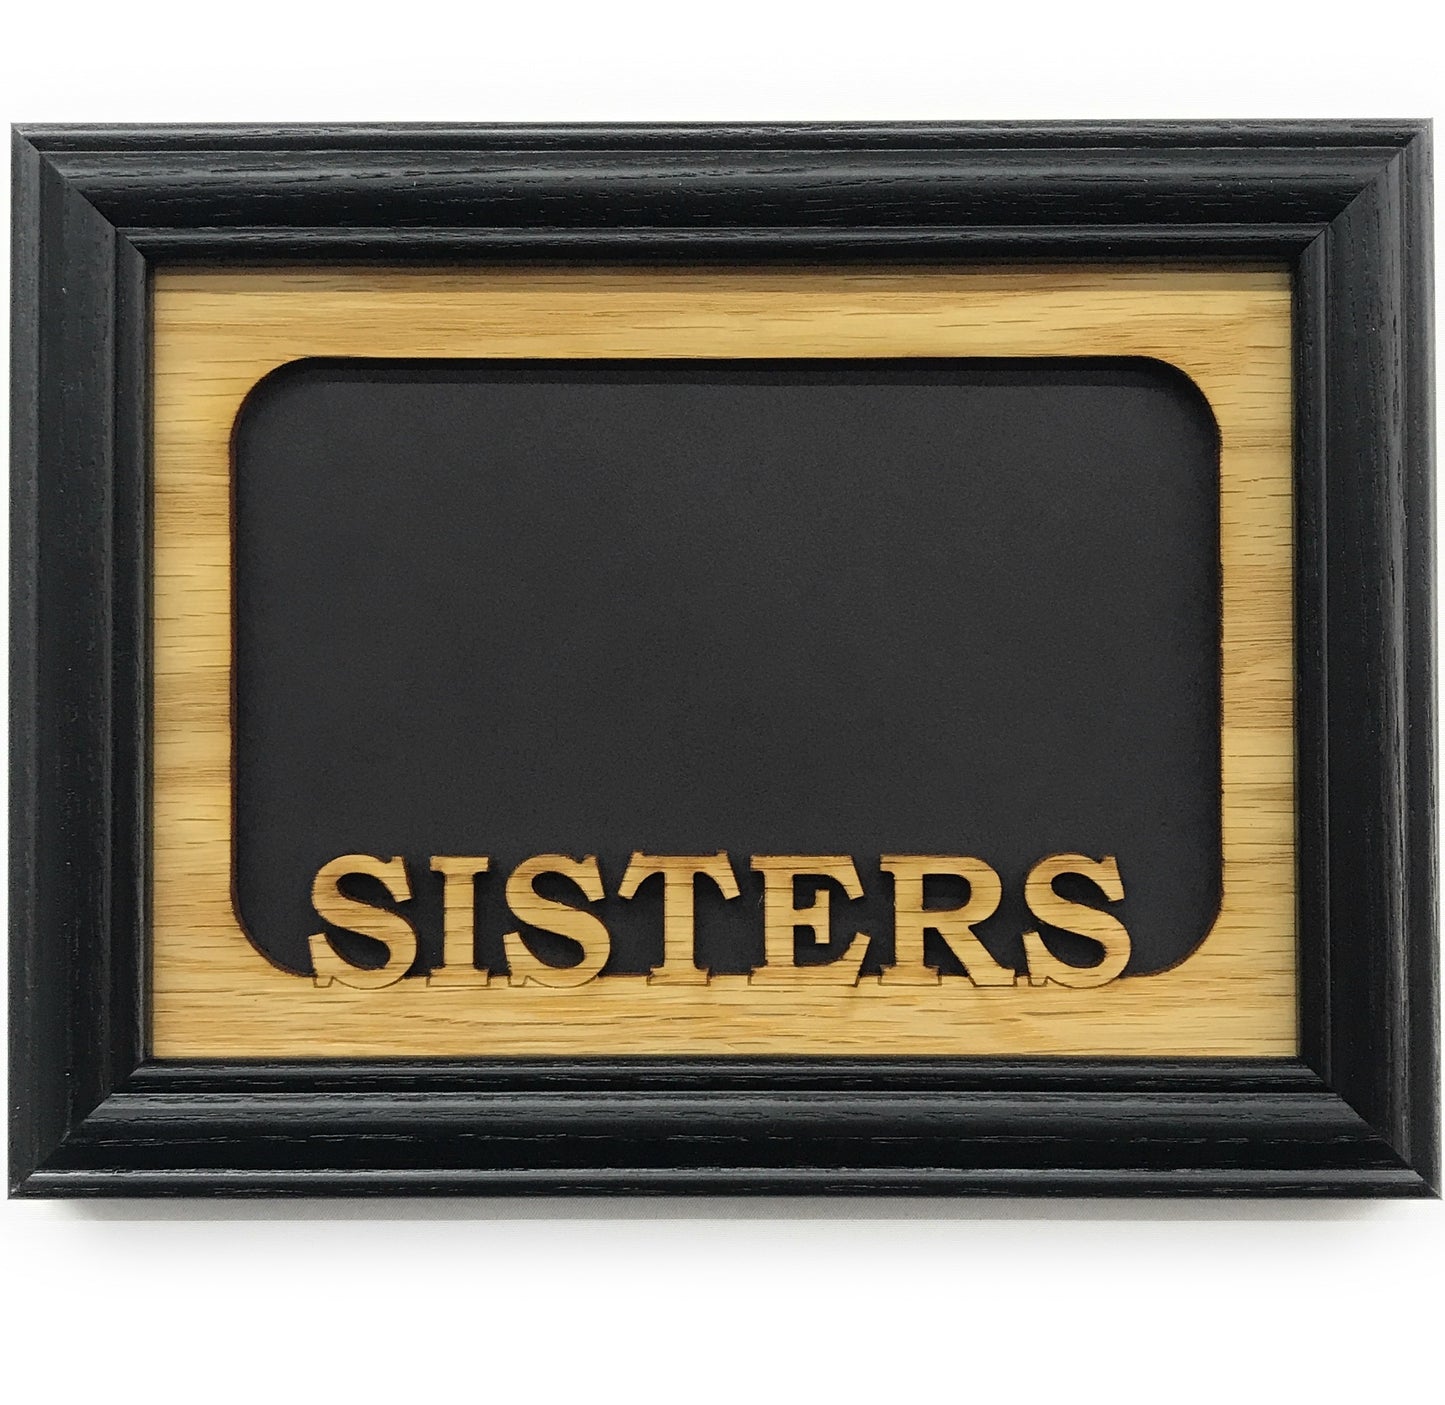 Sisters Picture Frame - 5x7 Frame Hold 4x6 Photo